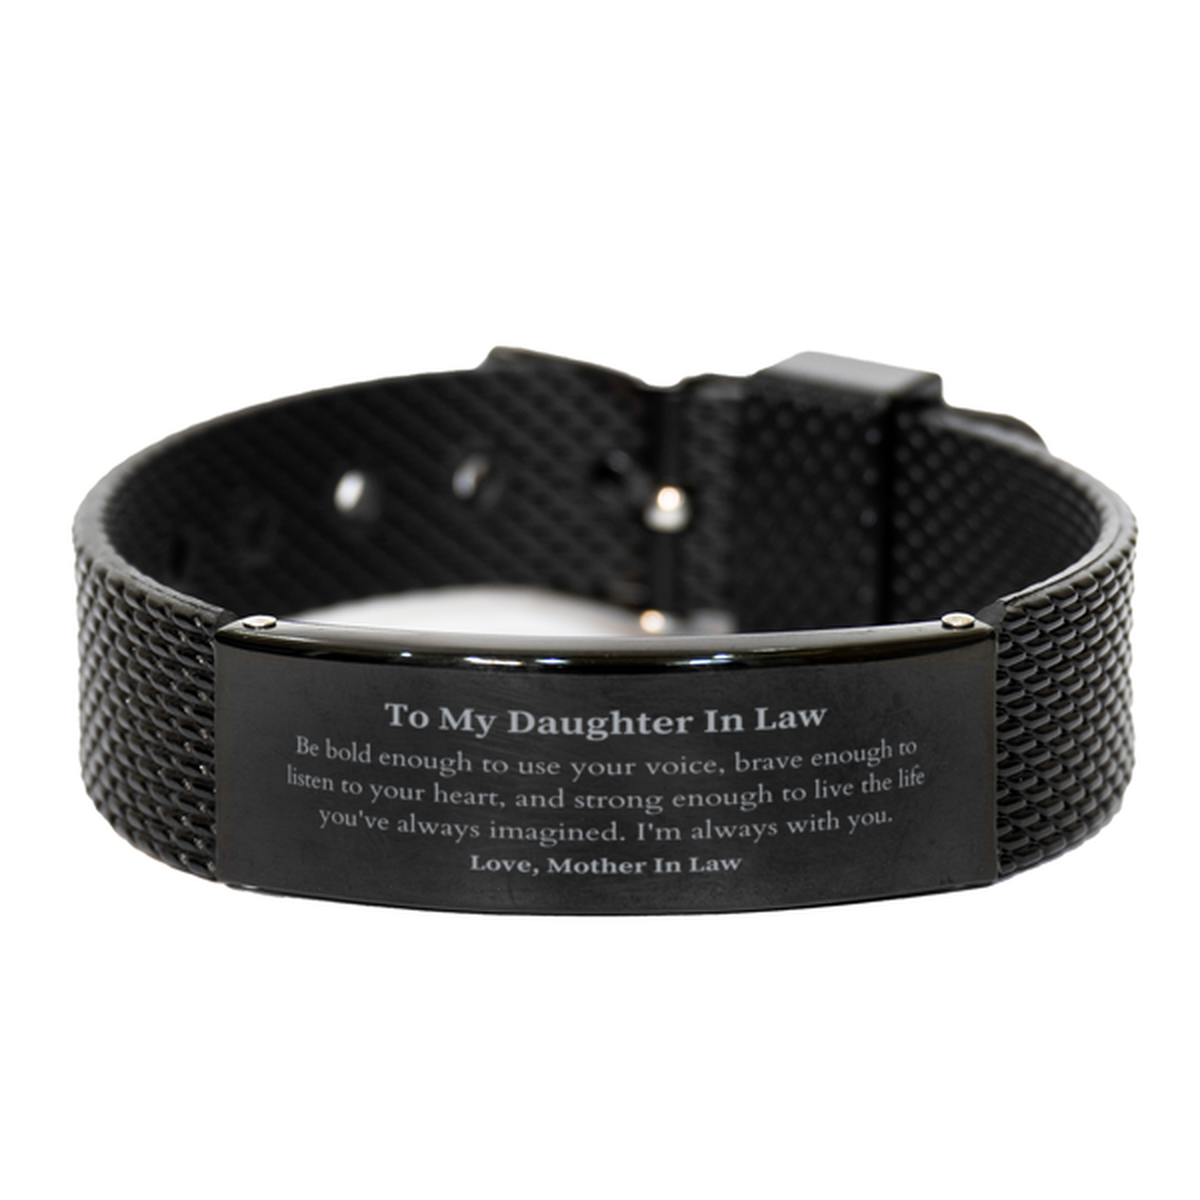 Keepsake Daughter In Law Black Shark Mesh Bracelet Gift Idea Graduation Christmas Birthday Daughter In Law from Mother In Law, Daughter In Law Be bold enough to use your voice, brave enough to listen to your heart. Love, Mother In Law